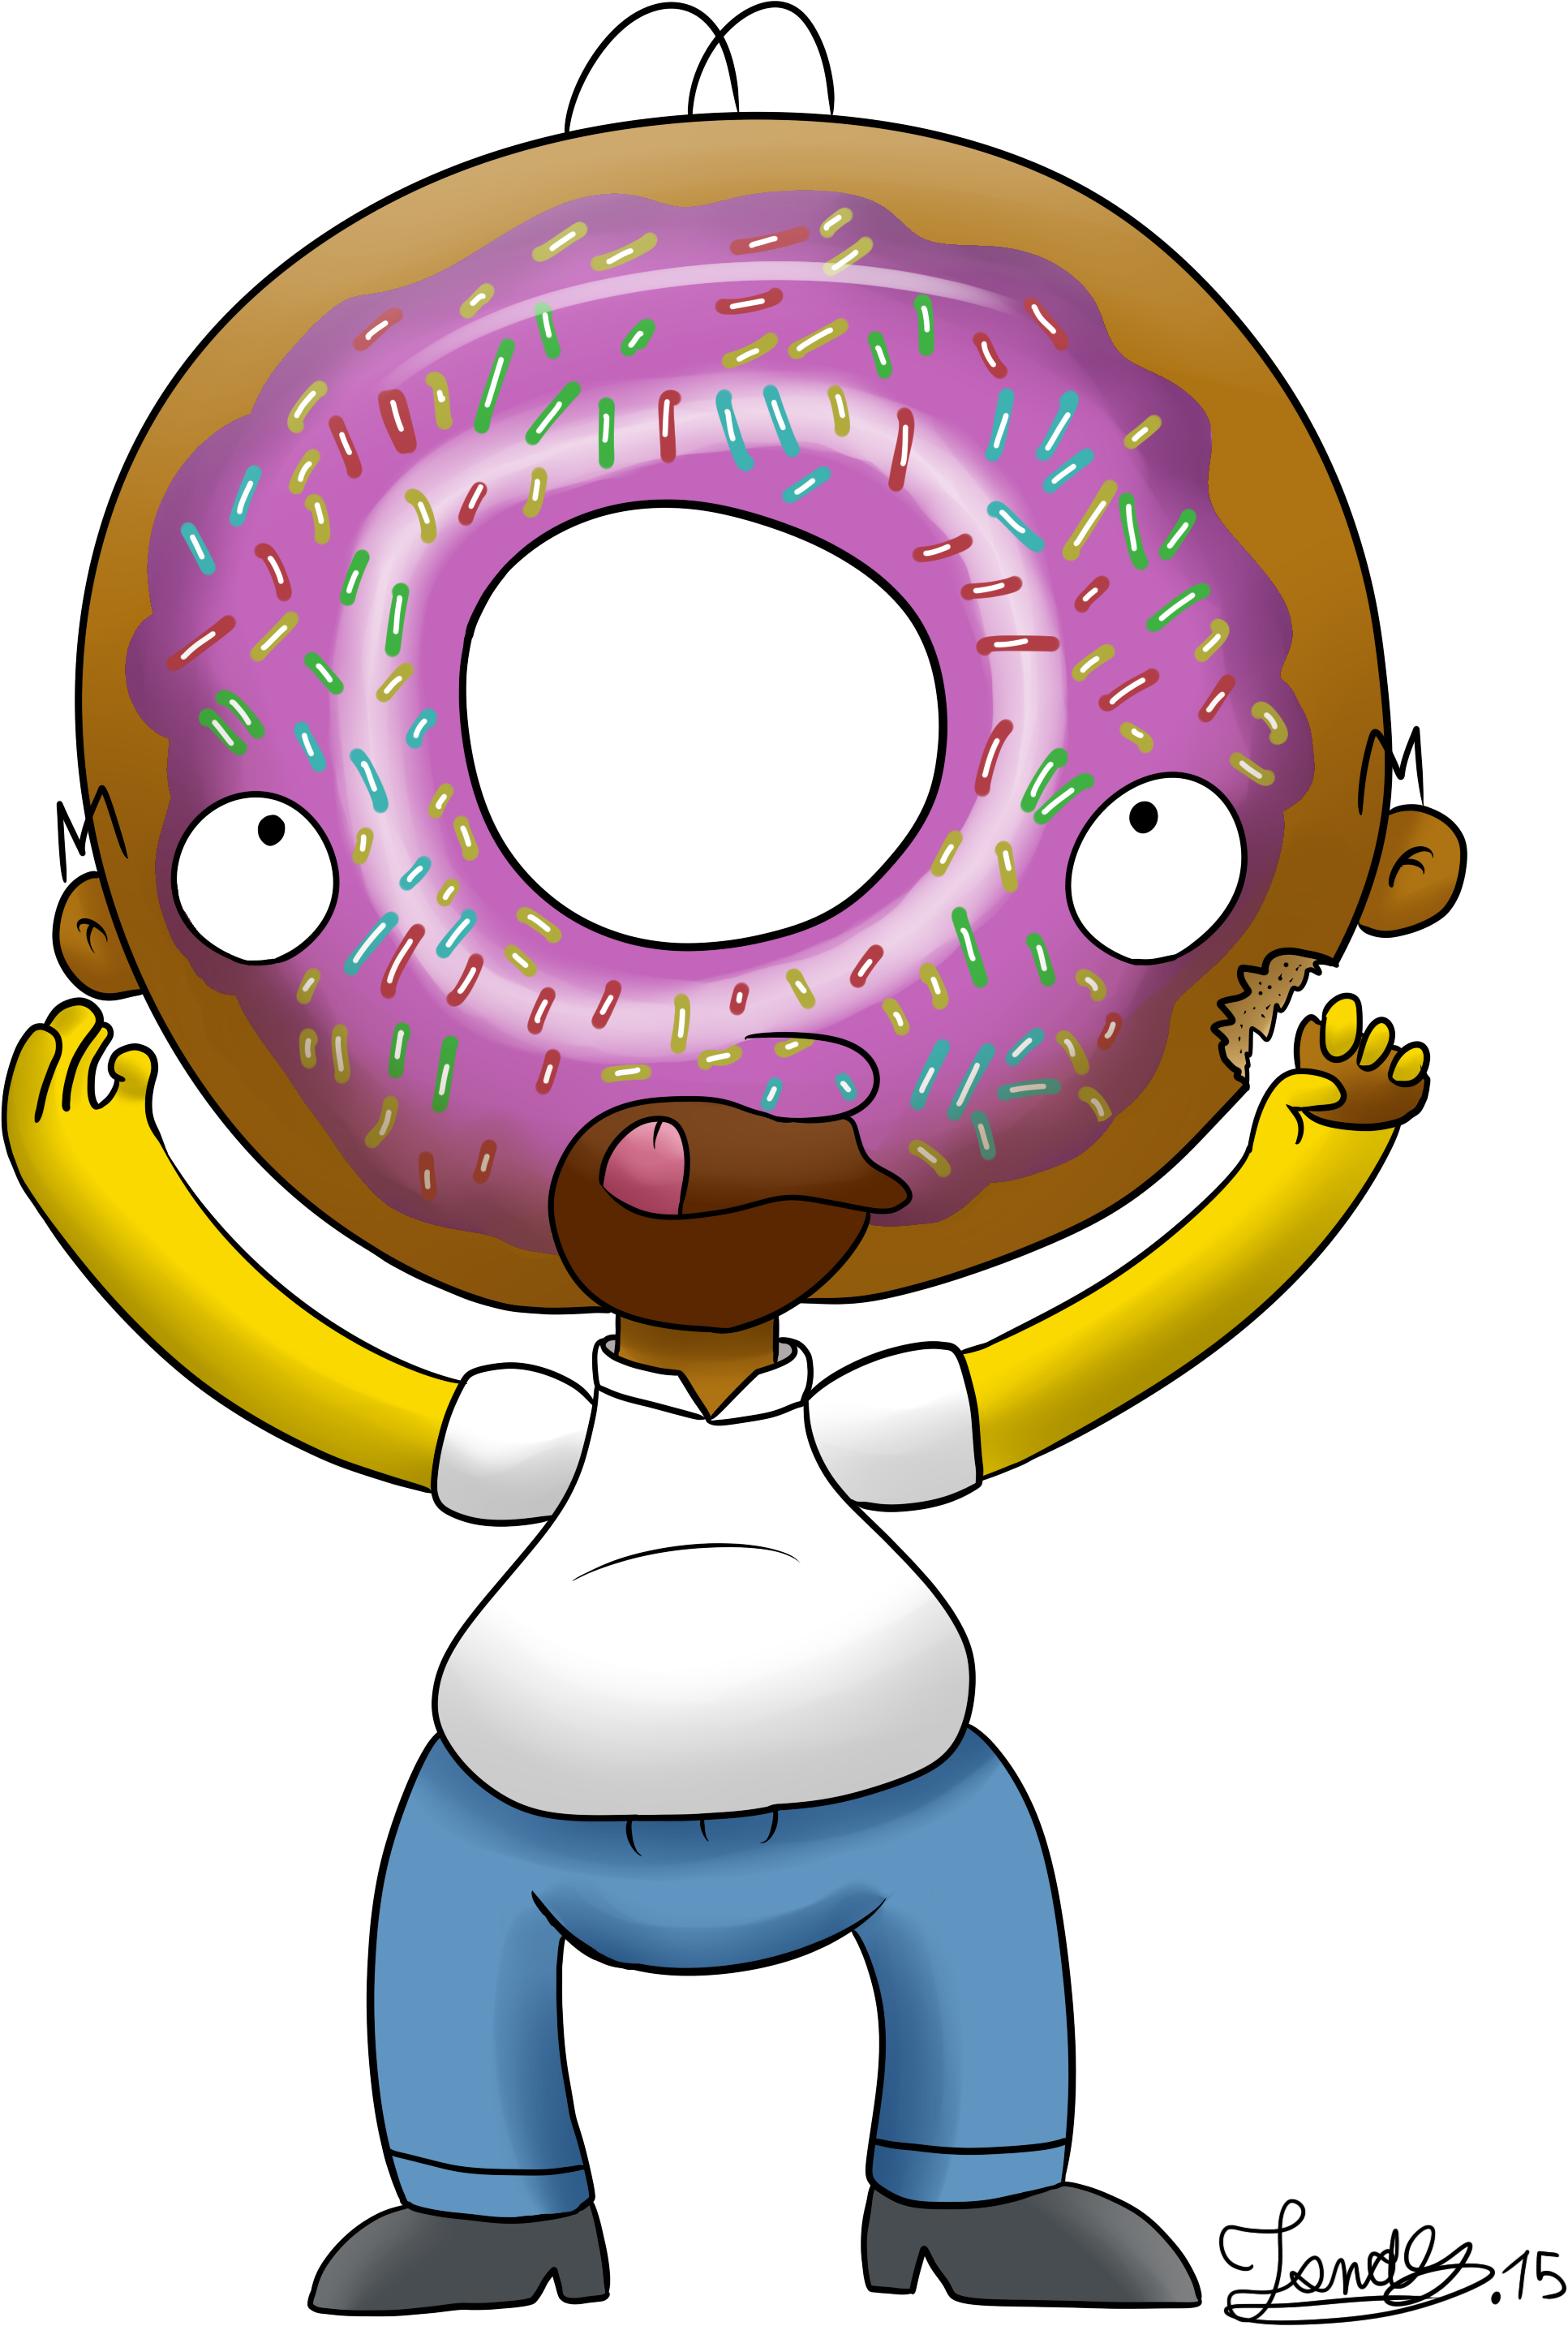 Download Homer Simpsons Donuts Head By Jonas - Homer Simpson Donut Png.